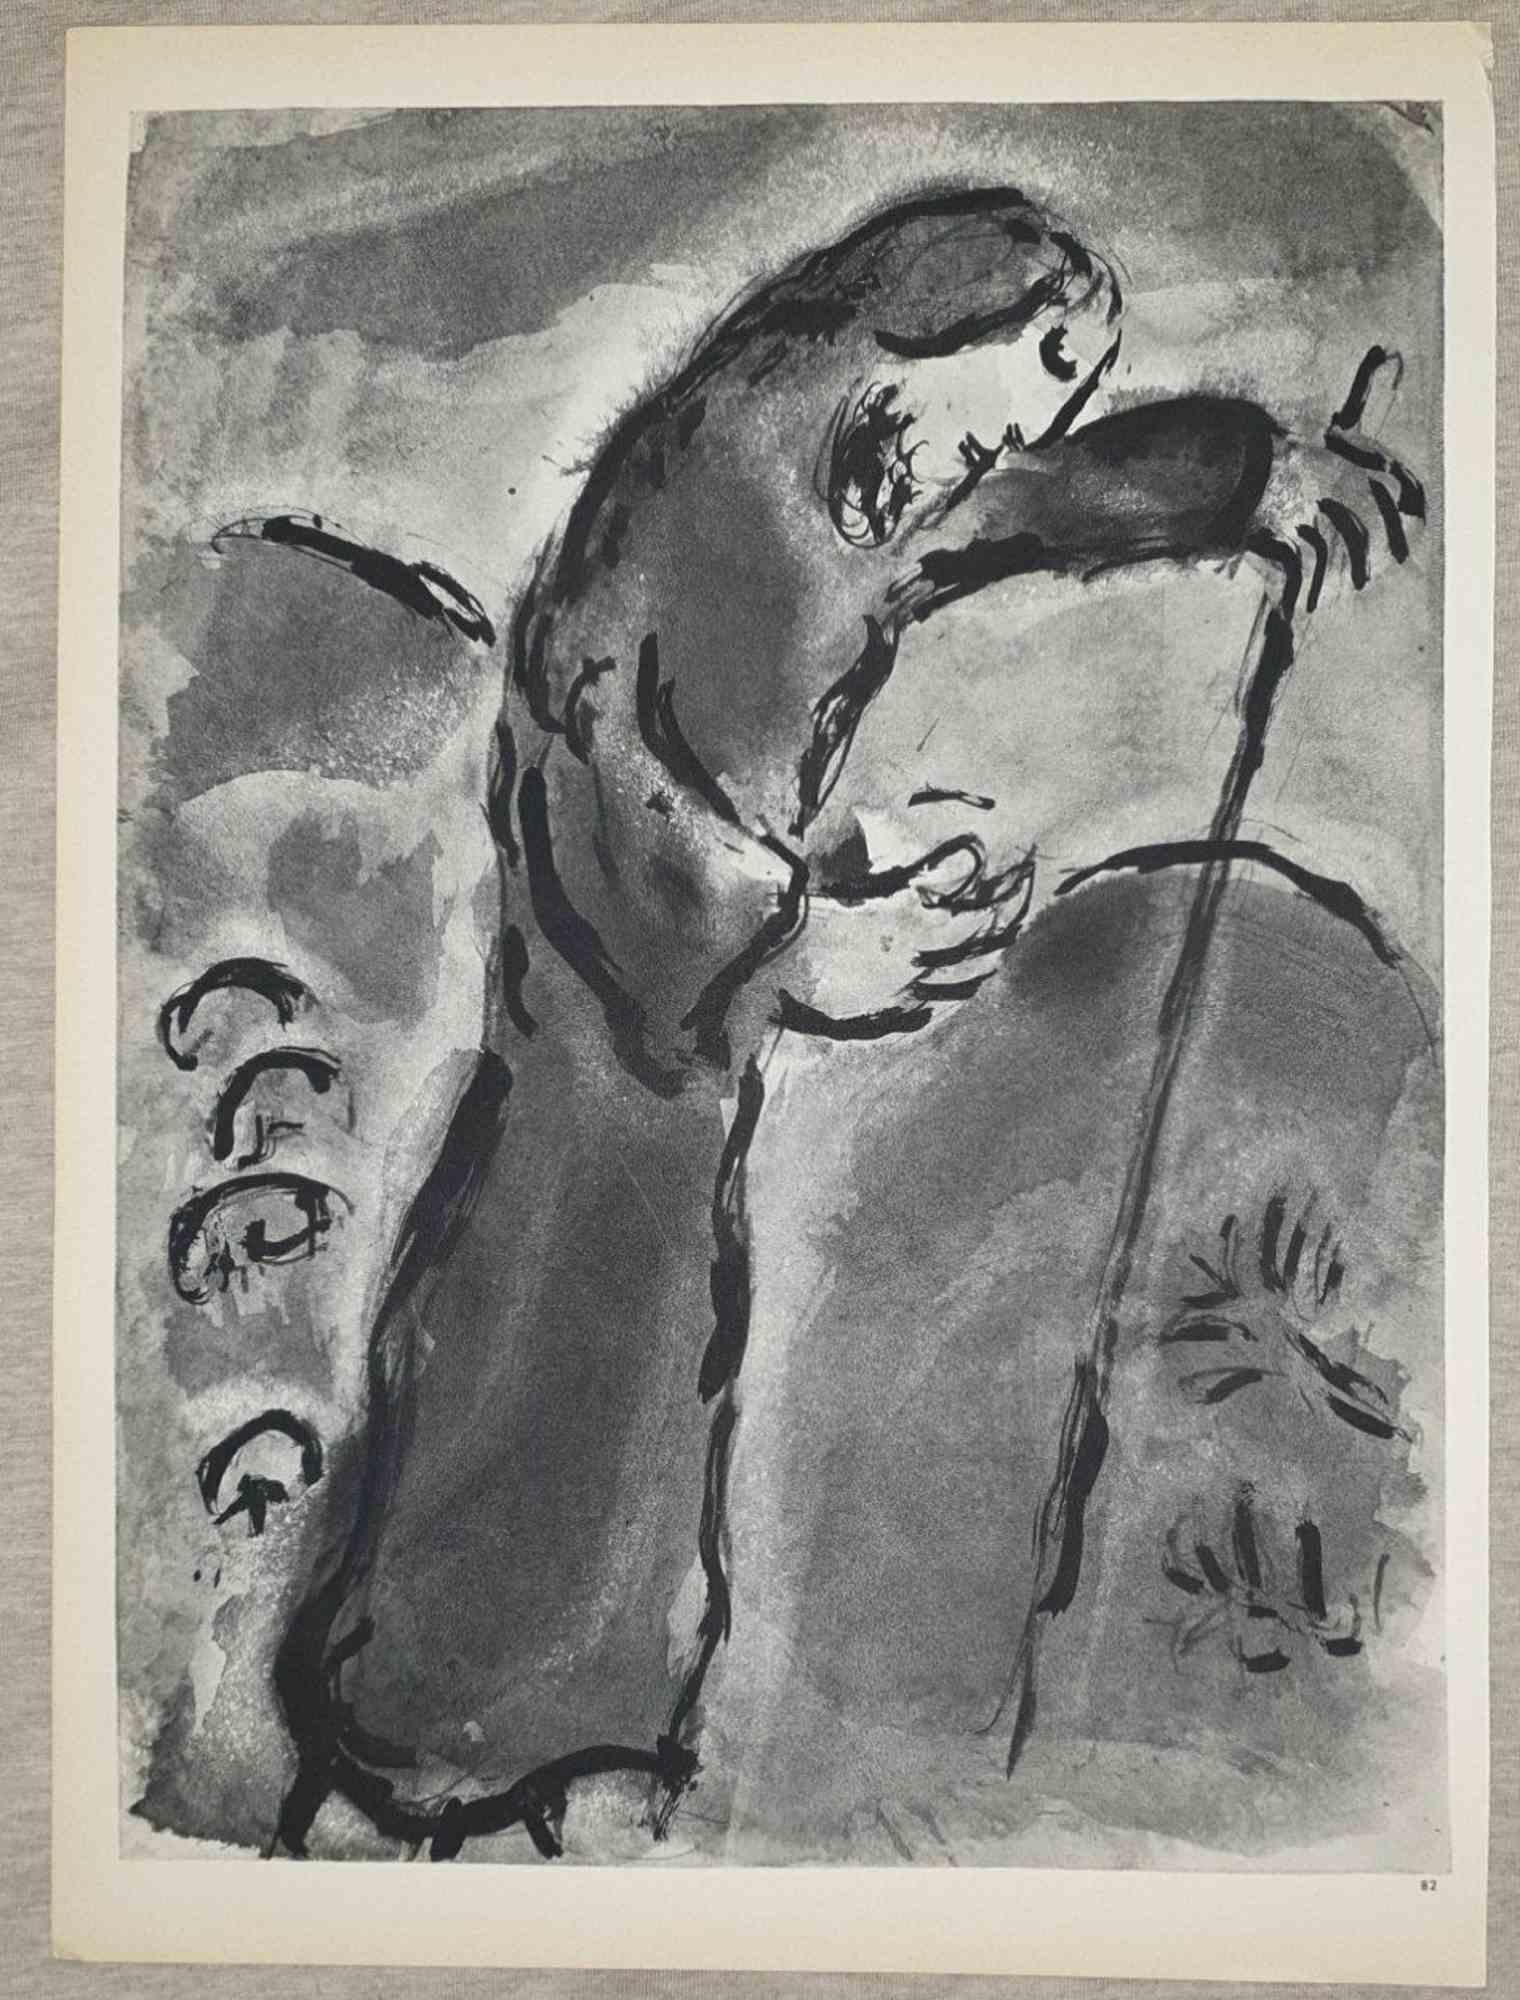 The Prophecy of Amos  is an artwork realized by March Chagall, 1960s.

Lithograph on brown-toned paper, no signature.

Lithograph on both sides.

Edition of 6500 unsigned lithographs. Printed by Mourlot and published by Tériade, Paris.

Ref.